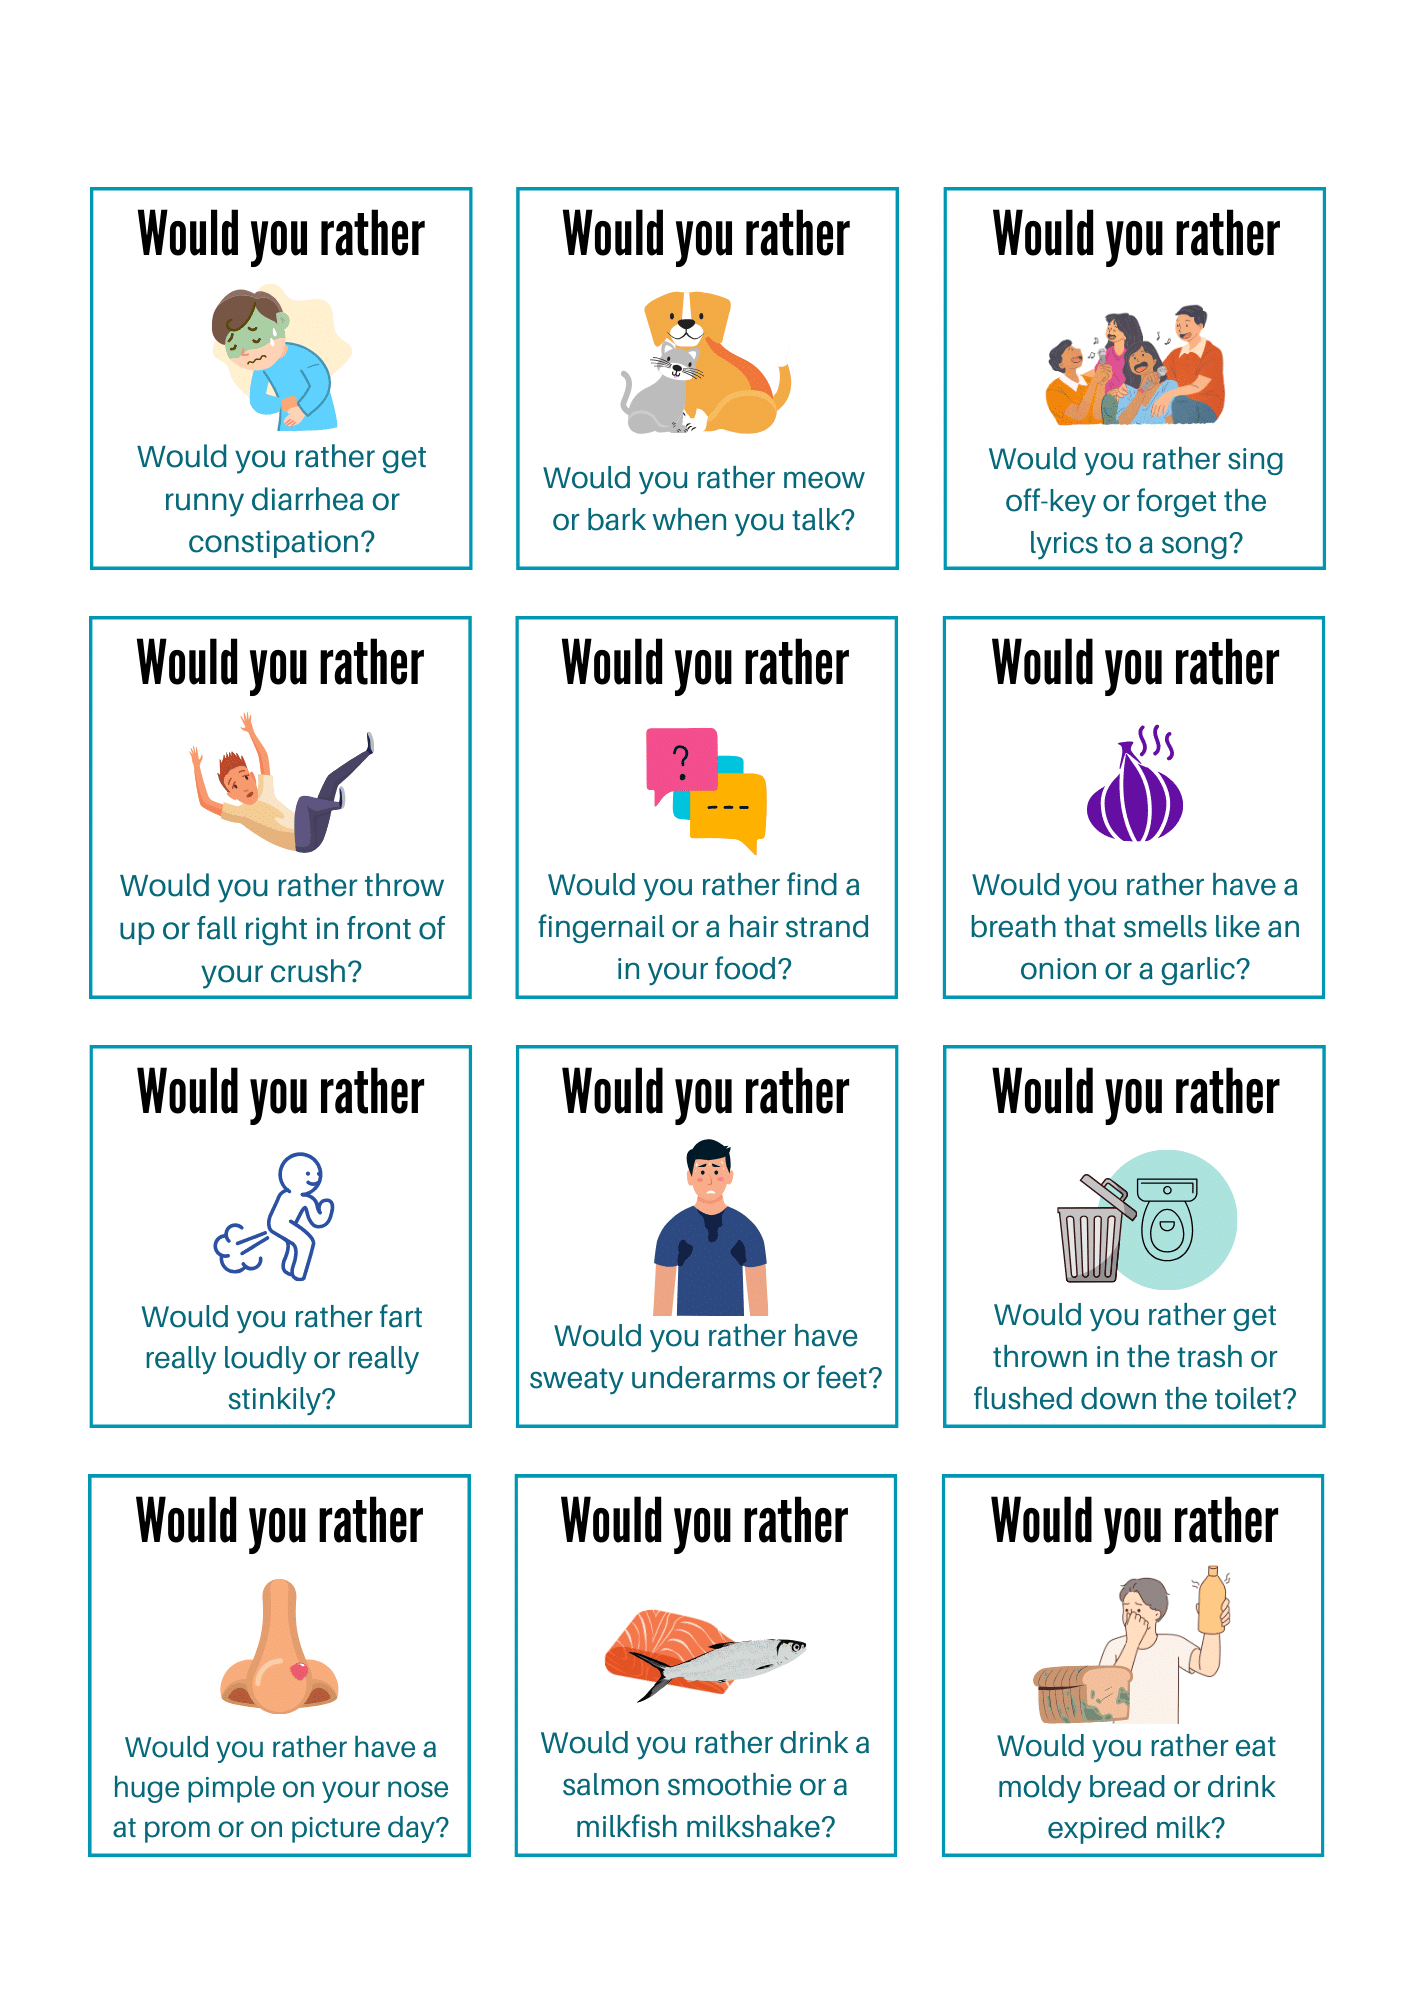 Would you rather questions for teens printable cards.